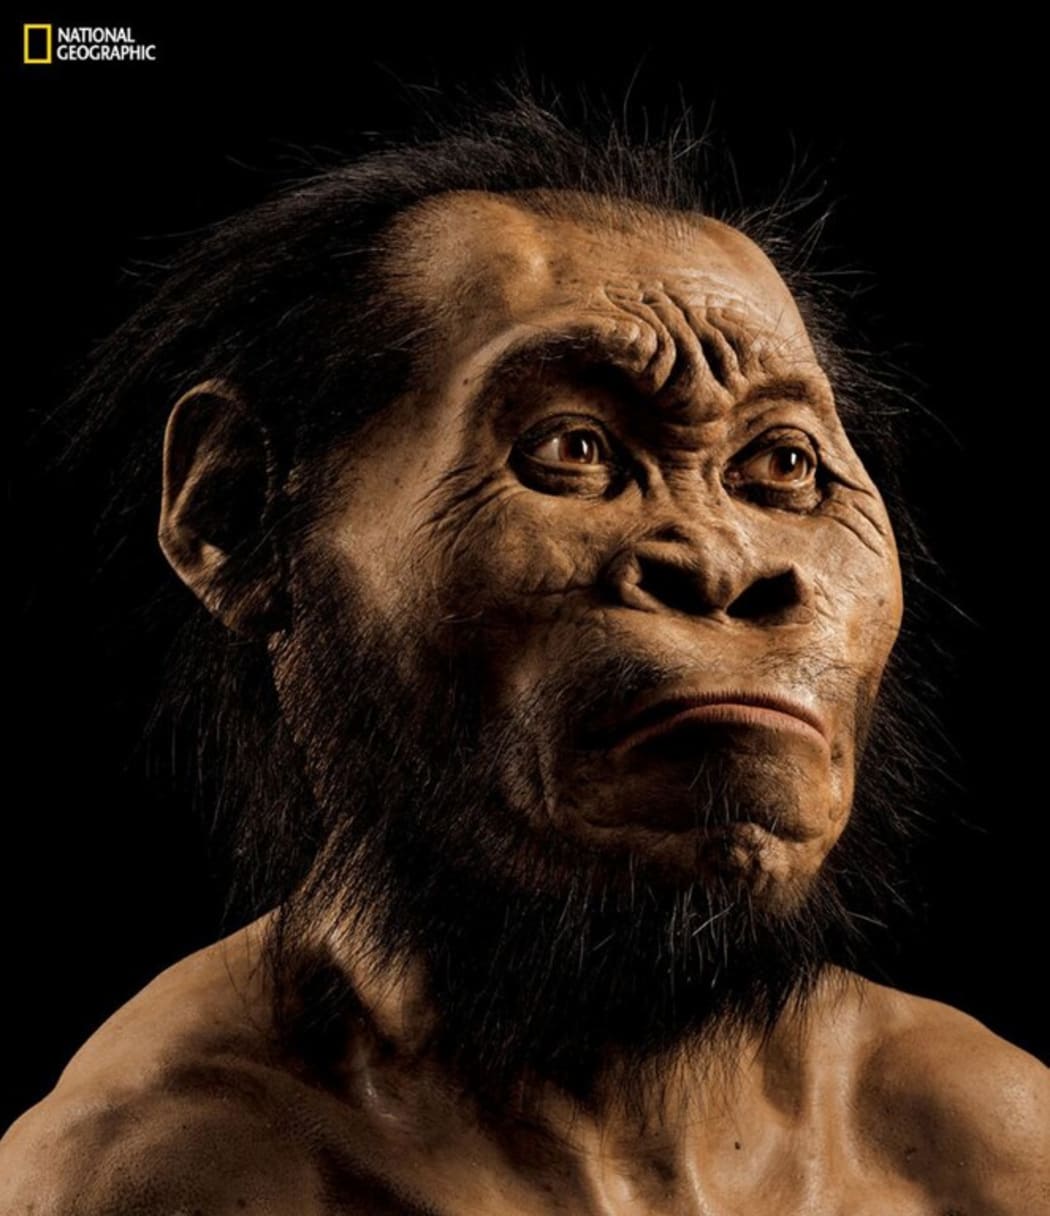 A reconstruction of a Homo naledi face, from the March 2015 National Geographic.